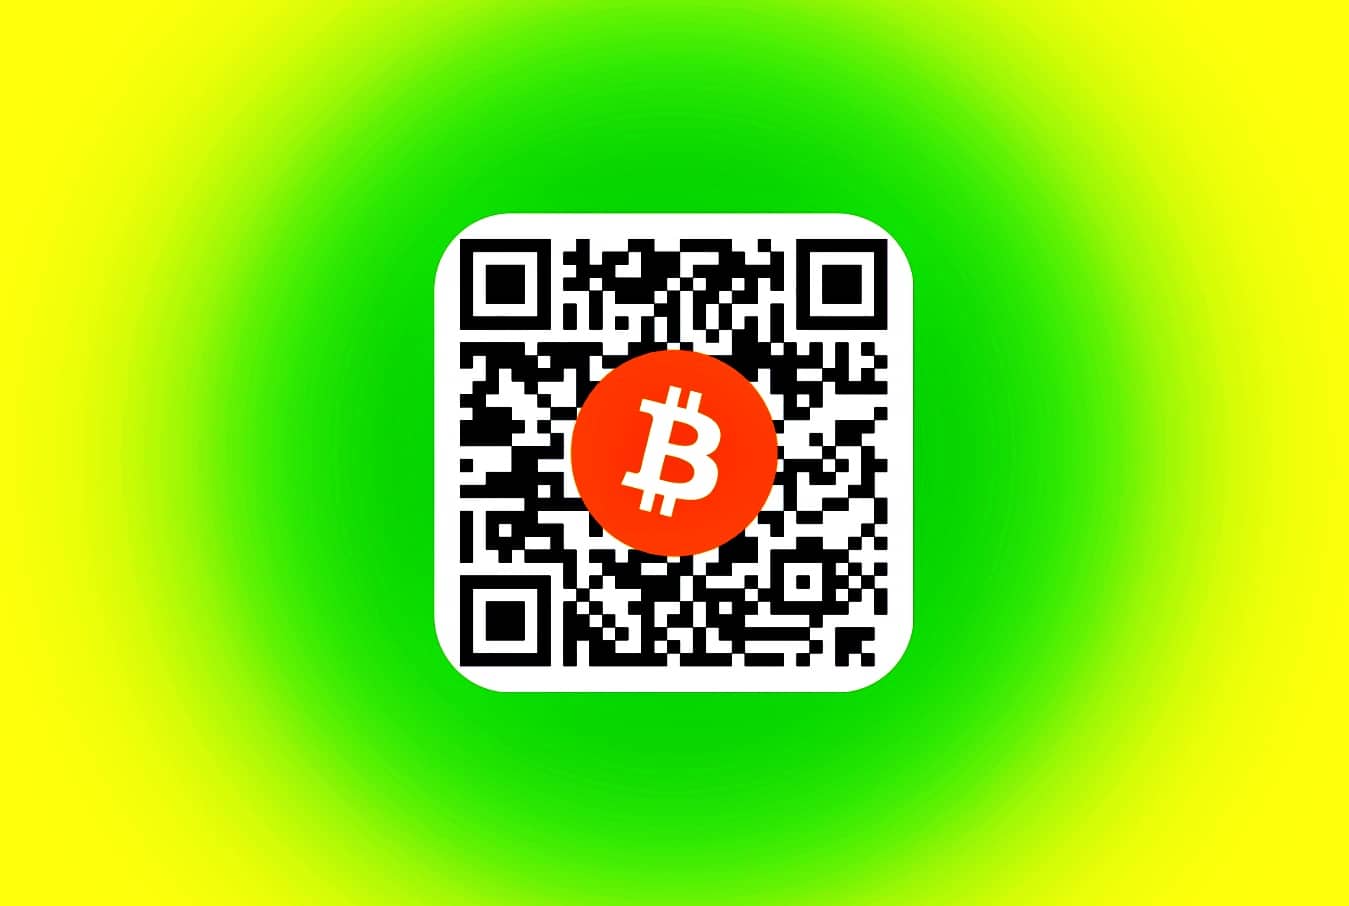 How to make a QR code to accept Bitcoin